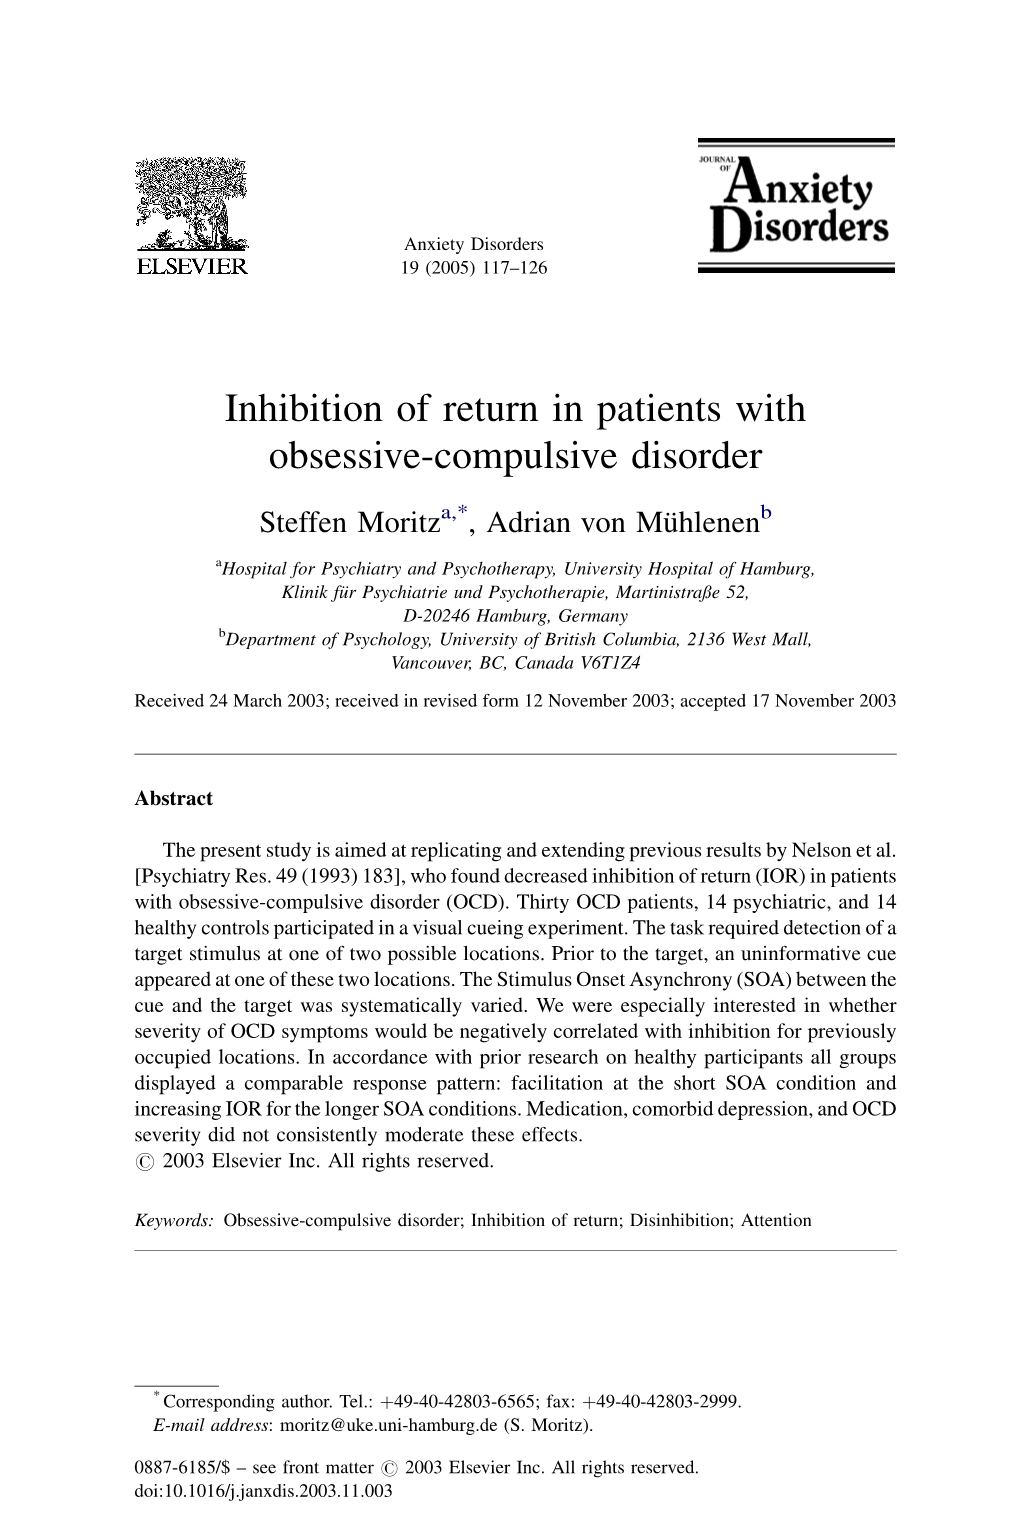 Inhibition of Return in Patients with Obsessive-Compulsive Disorder